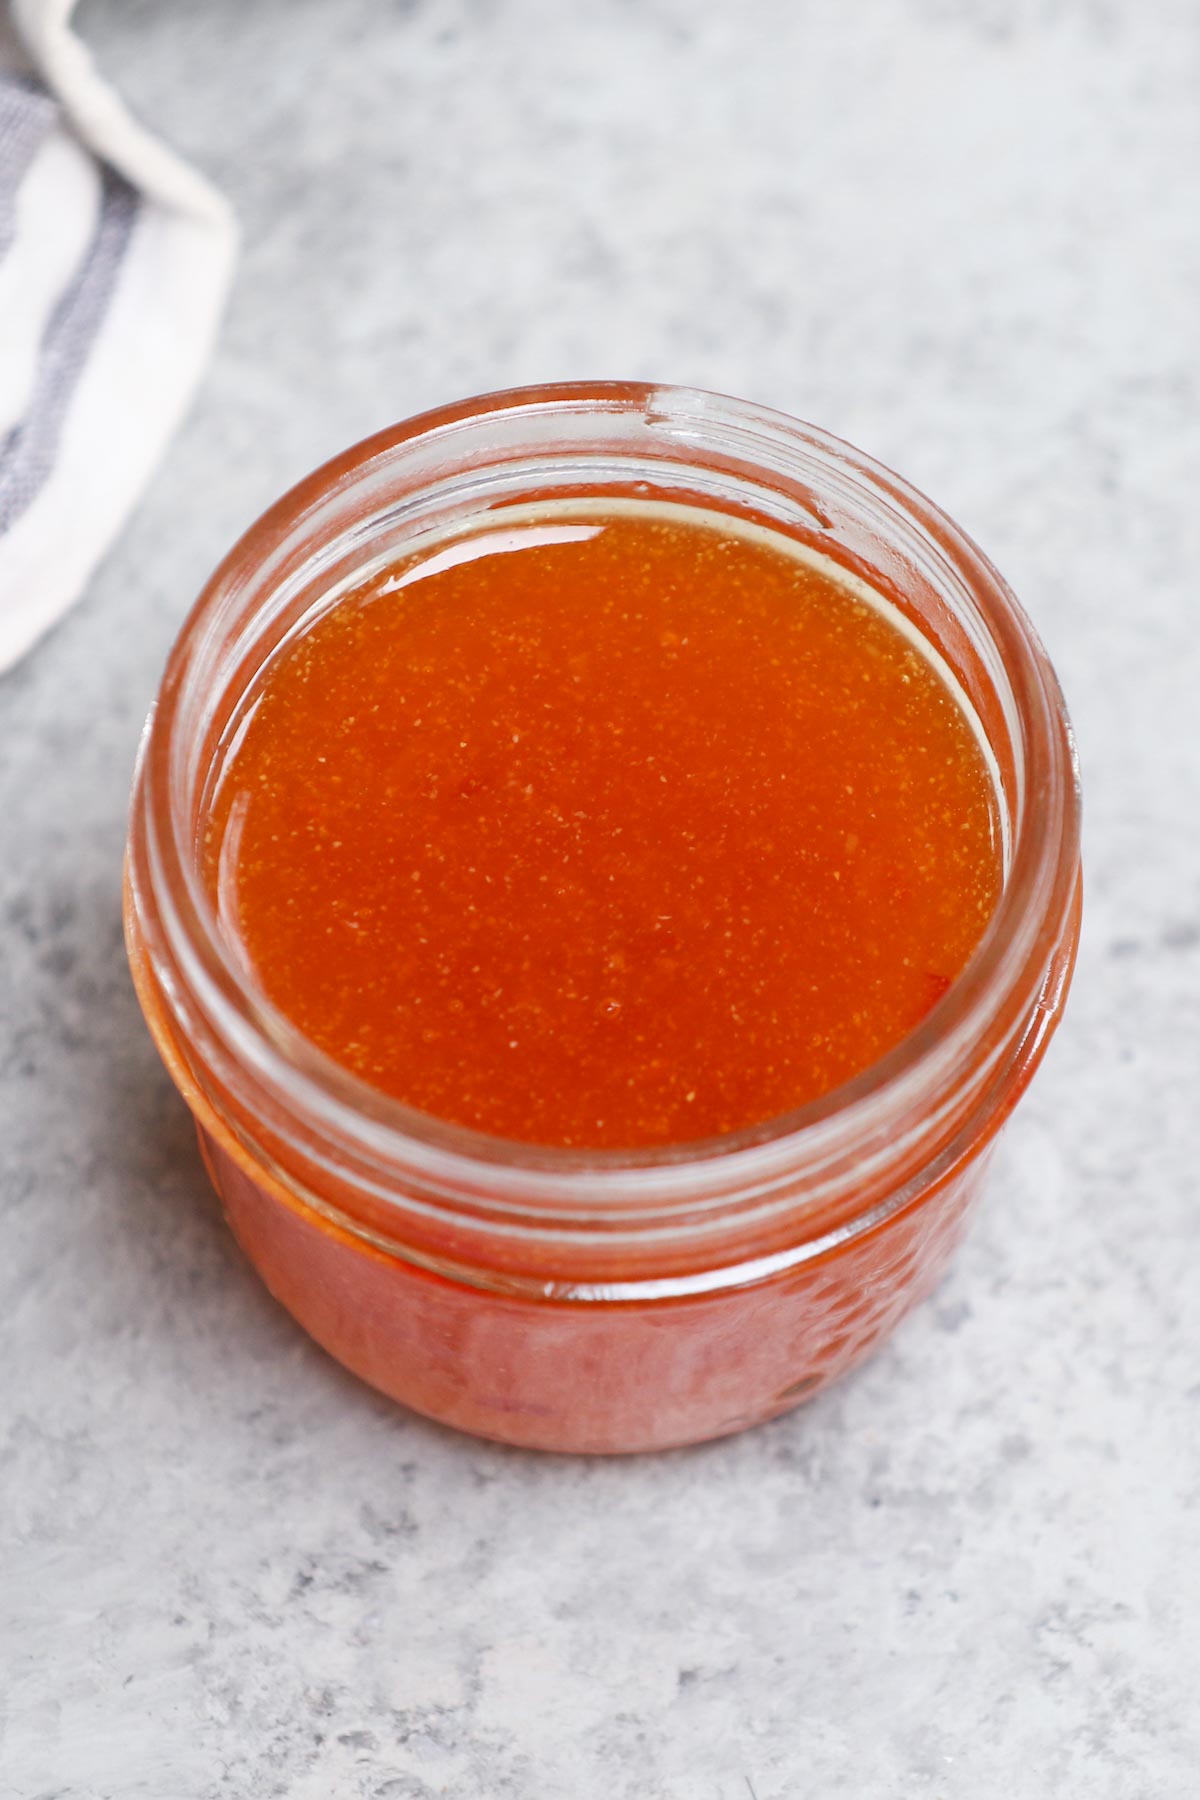 Ever wondered how you can make your very own Duck Sauce? It’s much easier than you think! It is a sweet and sour sauce that’s often used as a dip for spring rolls, crispy noodles, egg rolls, or drizzled on top of your favorite dishes. With only 5 simple ingredients, it takes just a few minutes to put this tangy sauce together.